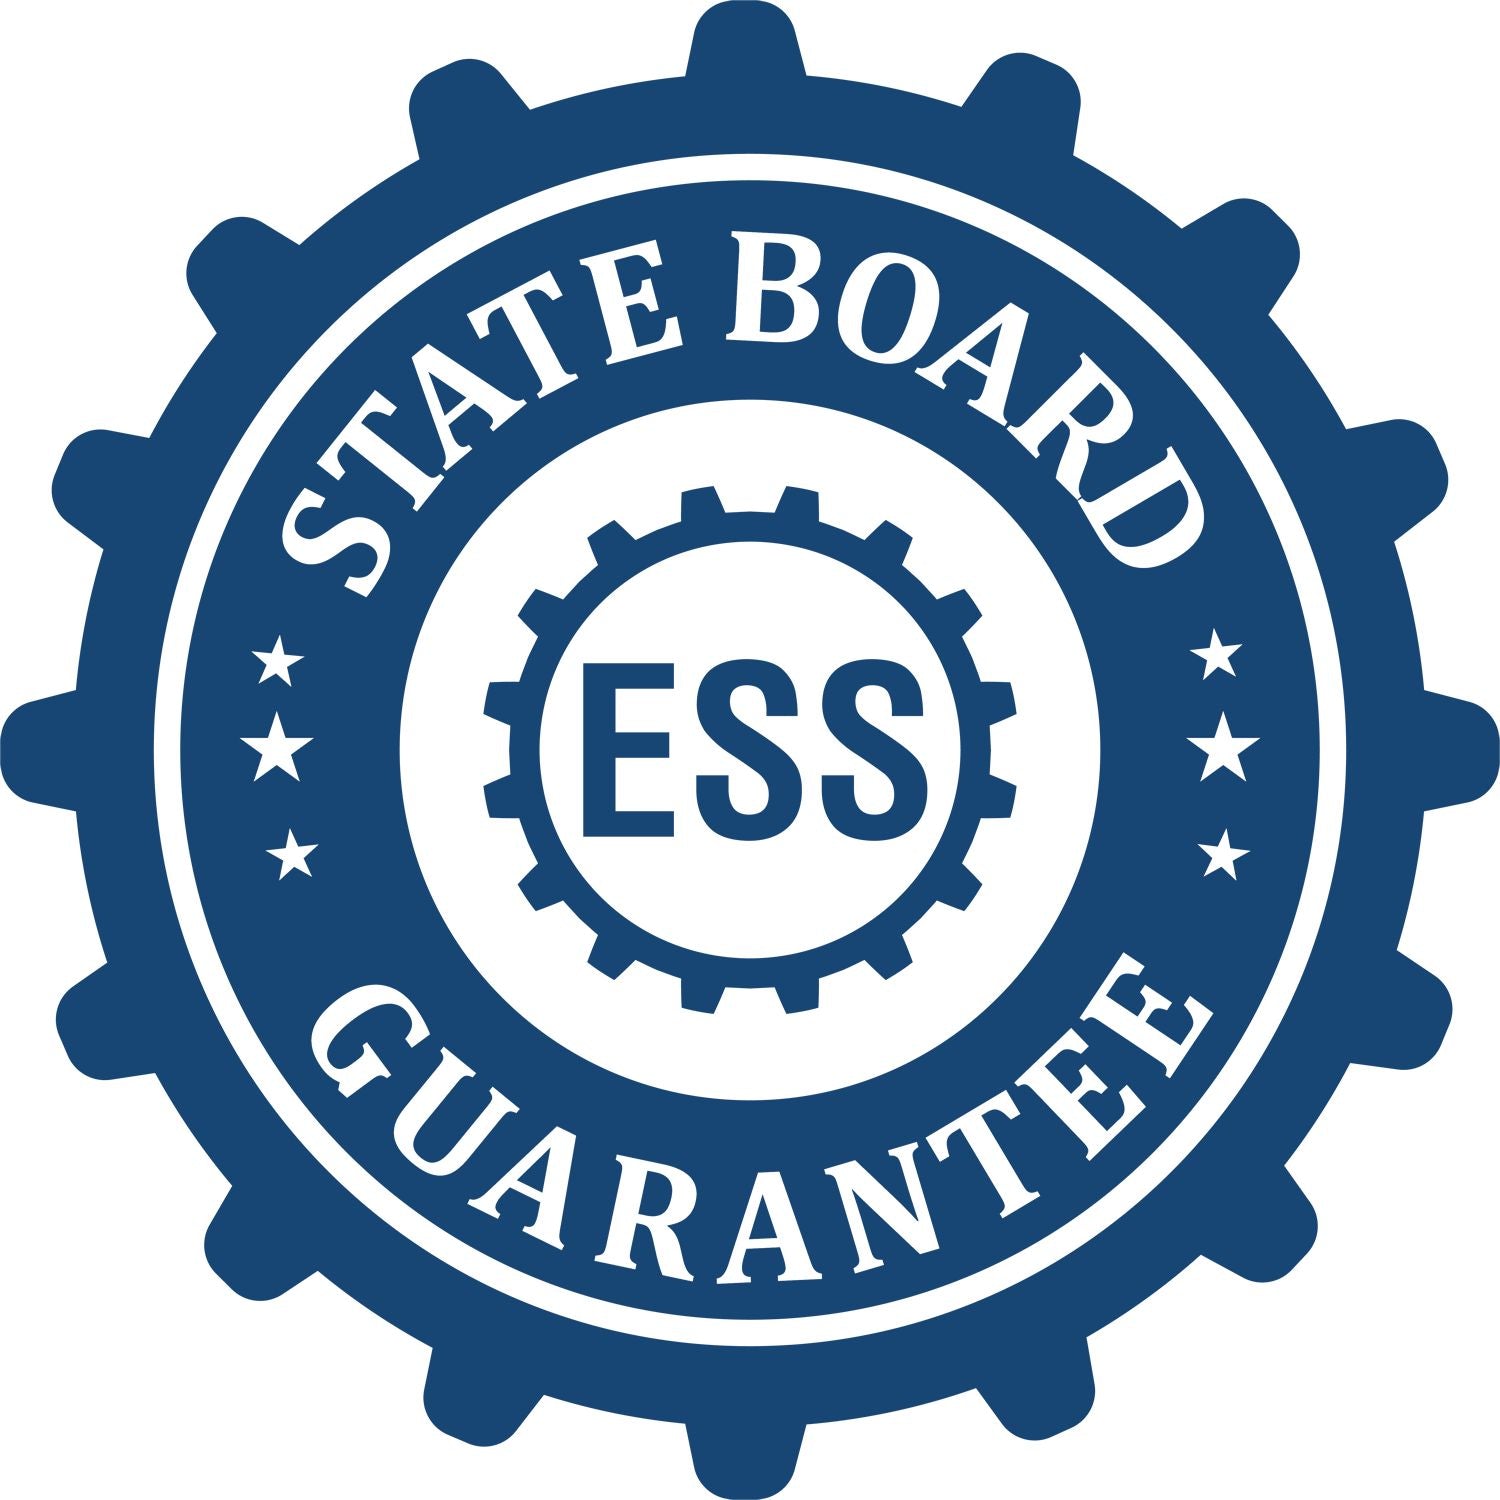 An emblem in a gear shape illustrating a state board guarantee for the Handheld Tennessee Land Surveyor Seal product.